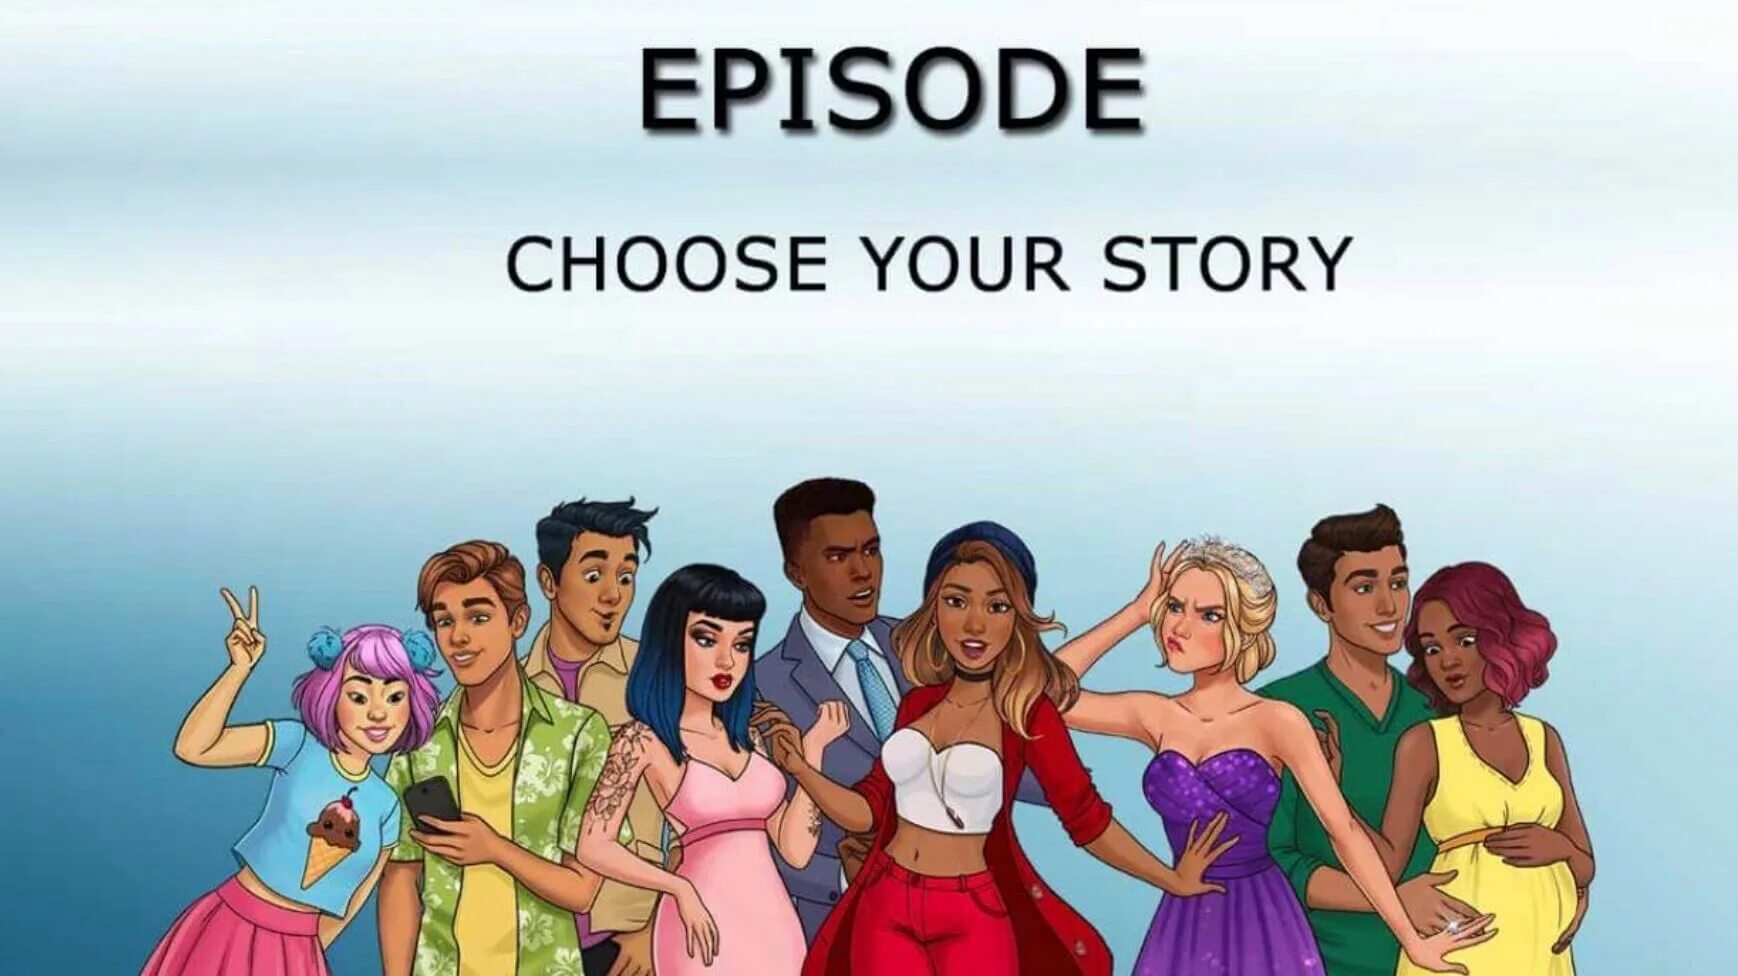 Episode игра. Игра Episode choose your story. Choose your story история. Episode мод. This is your story